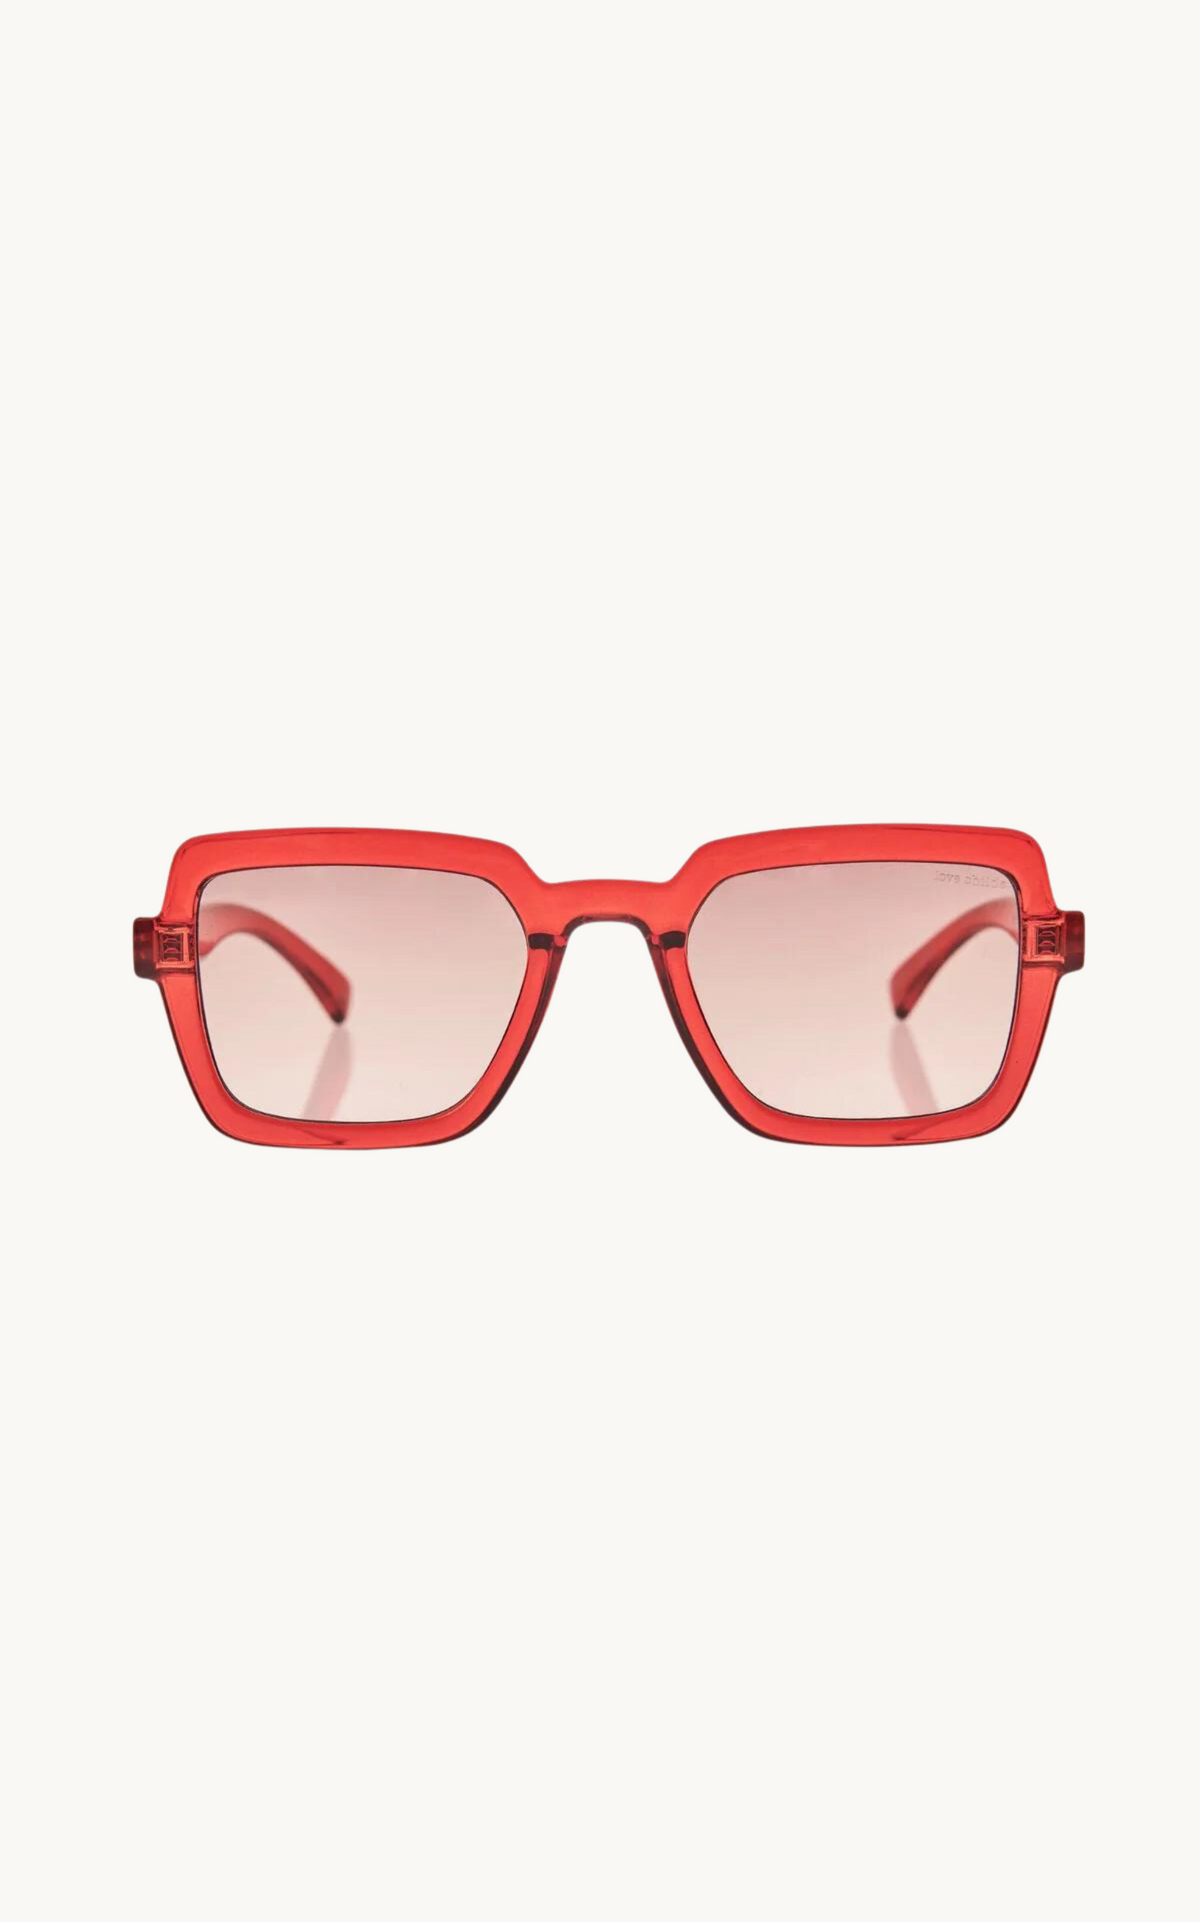 ENTRY Love You Translucent Red | Rose Gradient Bio Lens